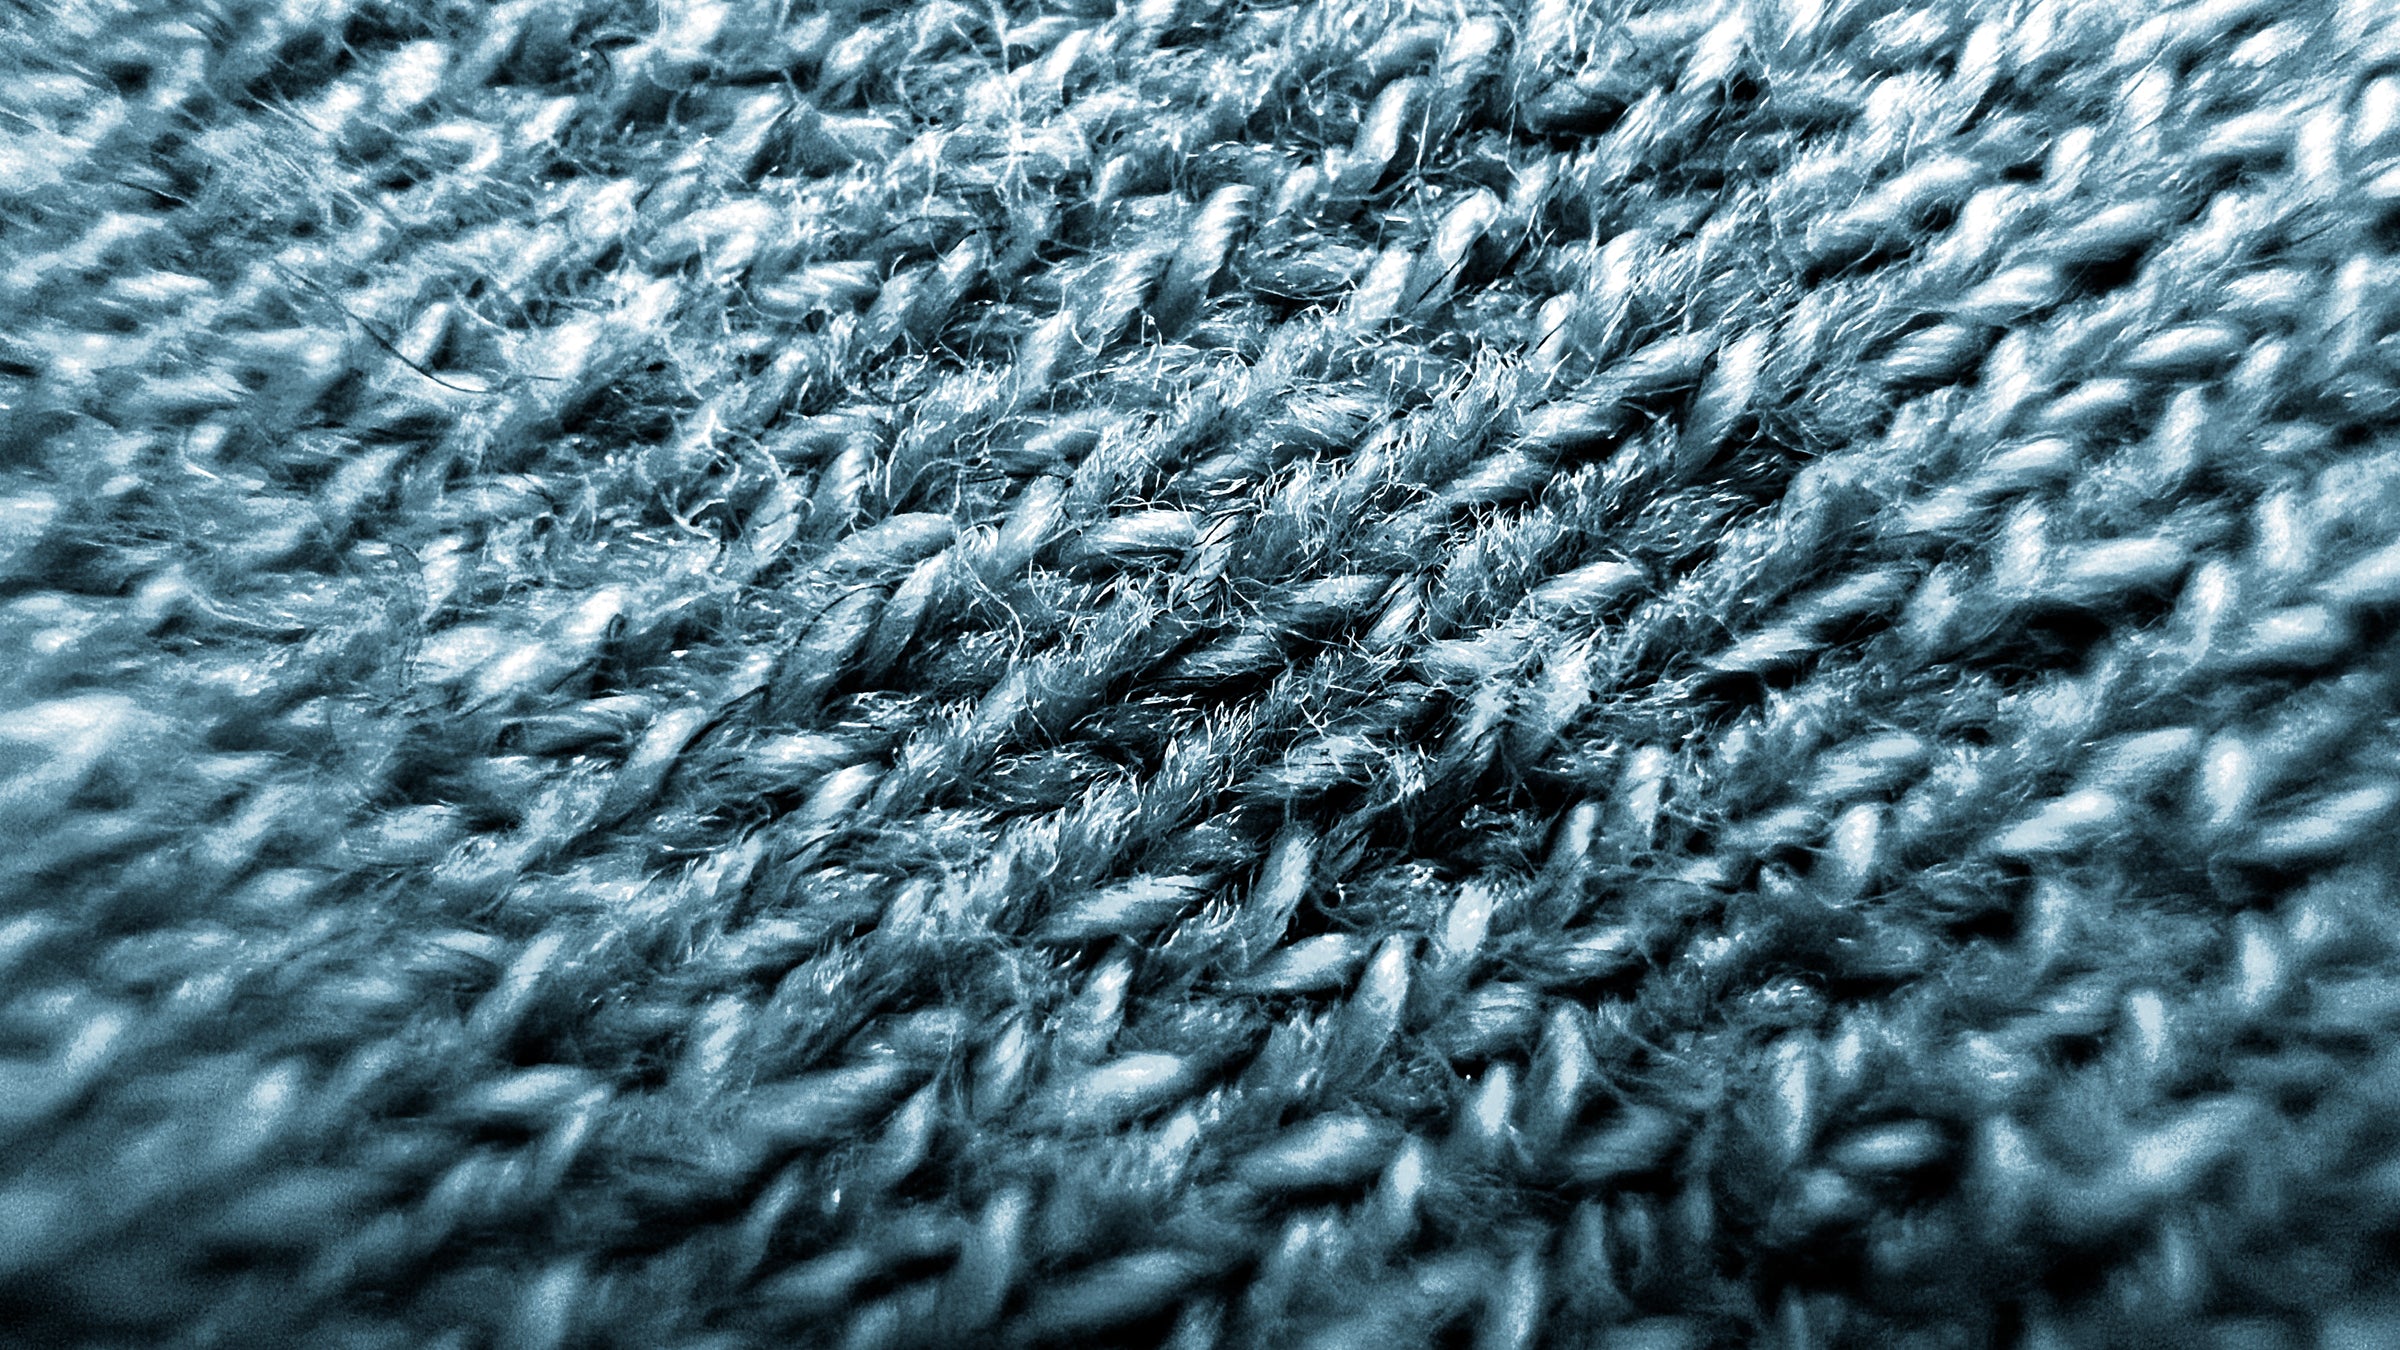 A very close up image of the threads that are in Purra socks.  These are the threads that have the Copptech antimicrobial treatment which provides the anti-odor and fungal elements to them.